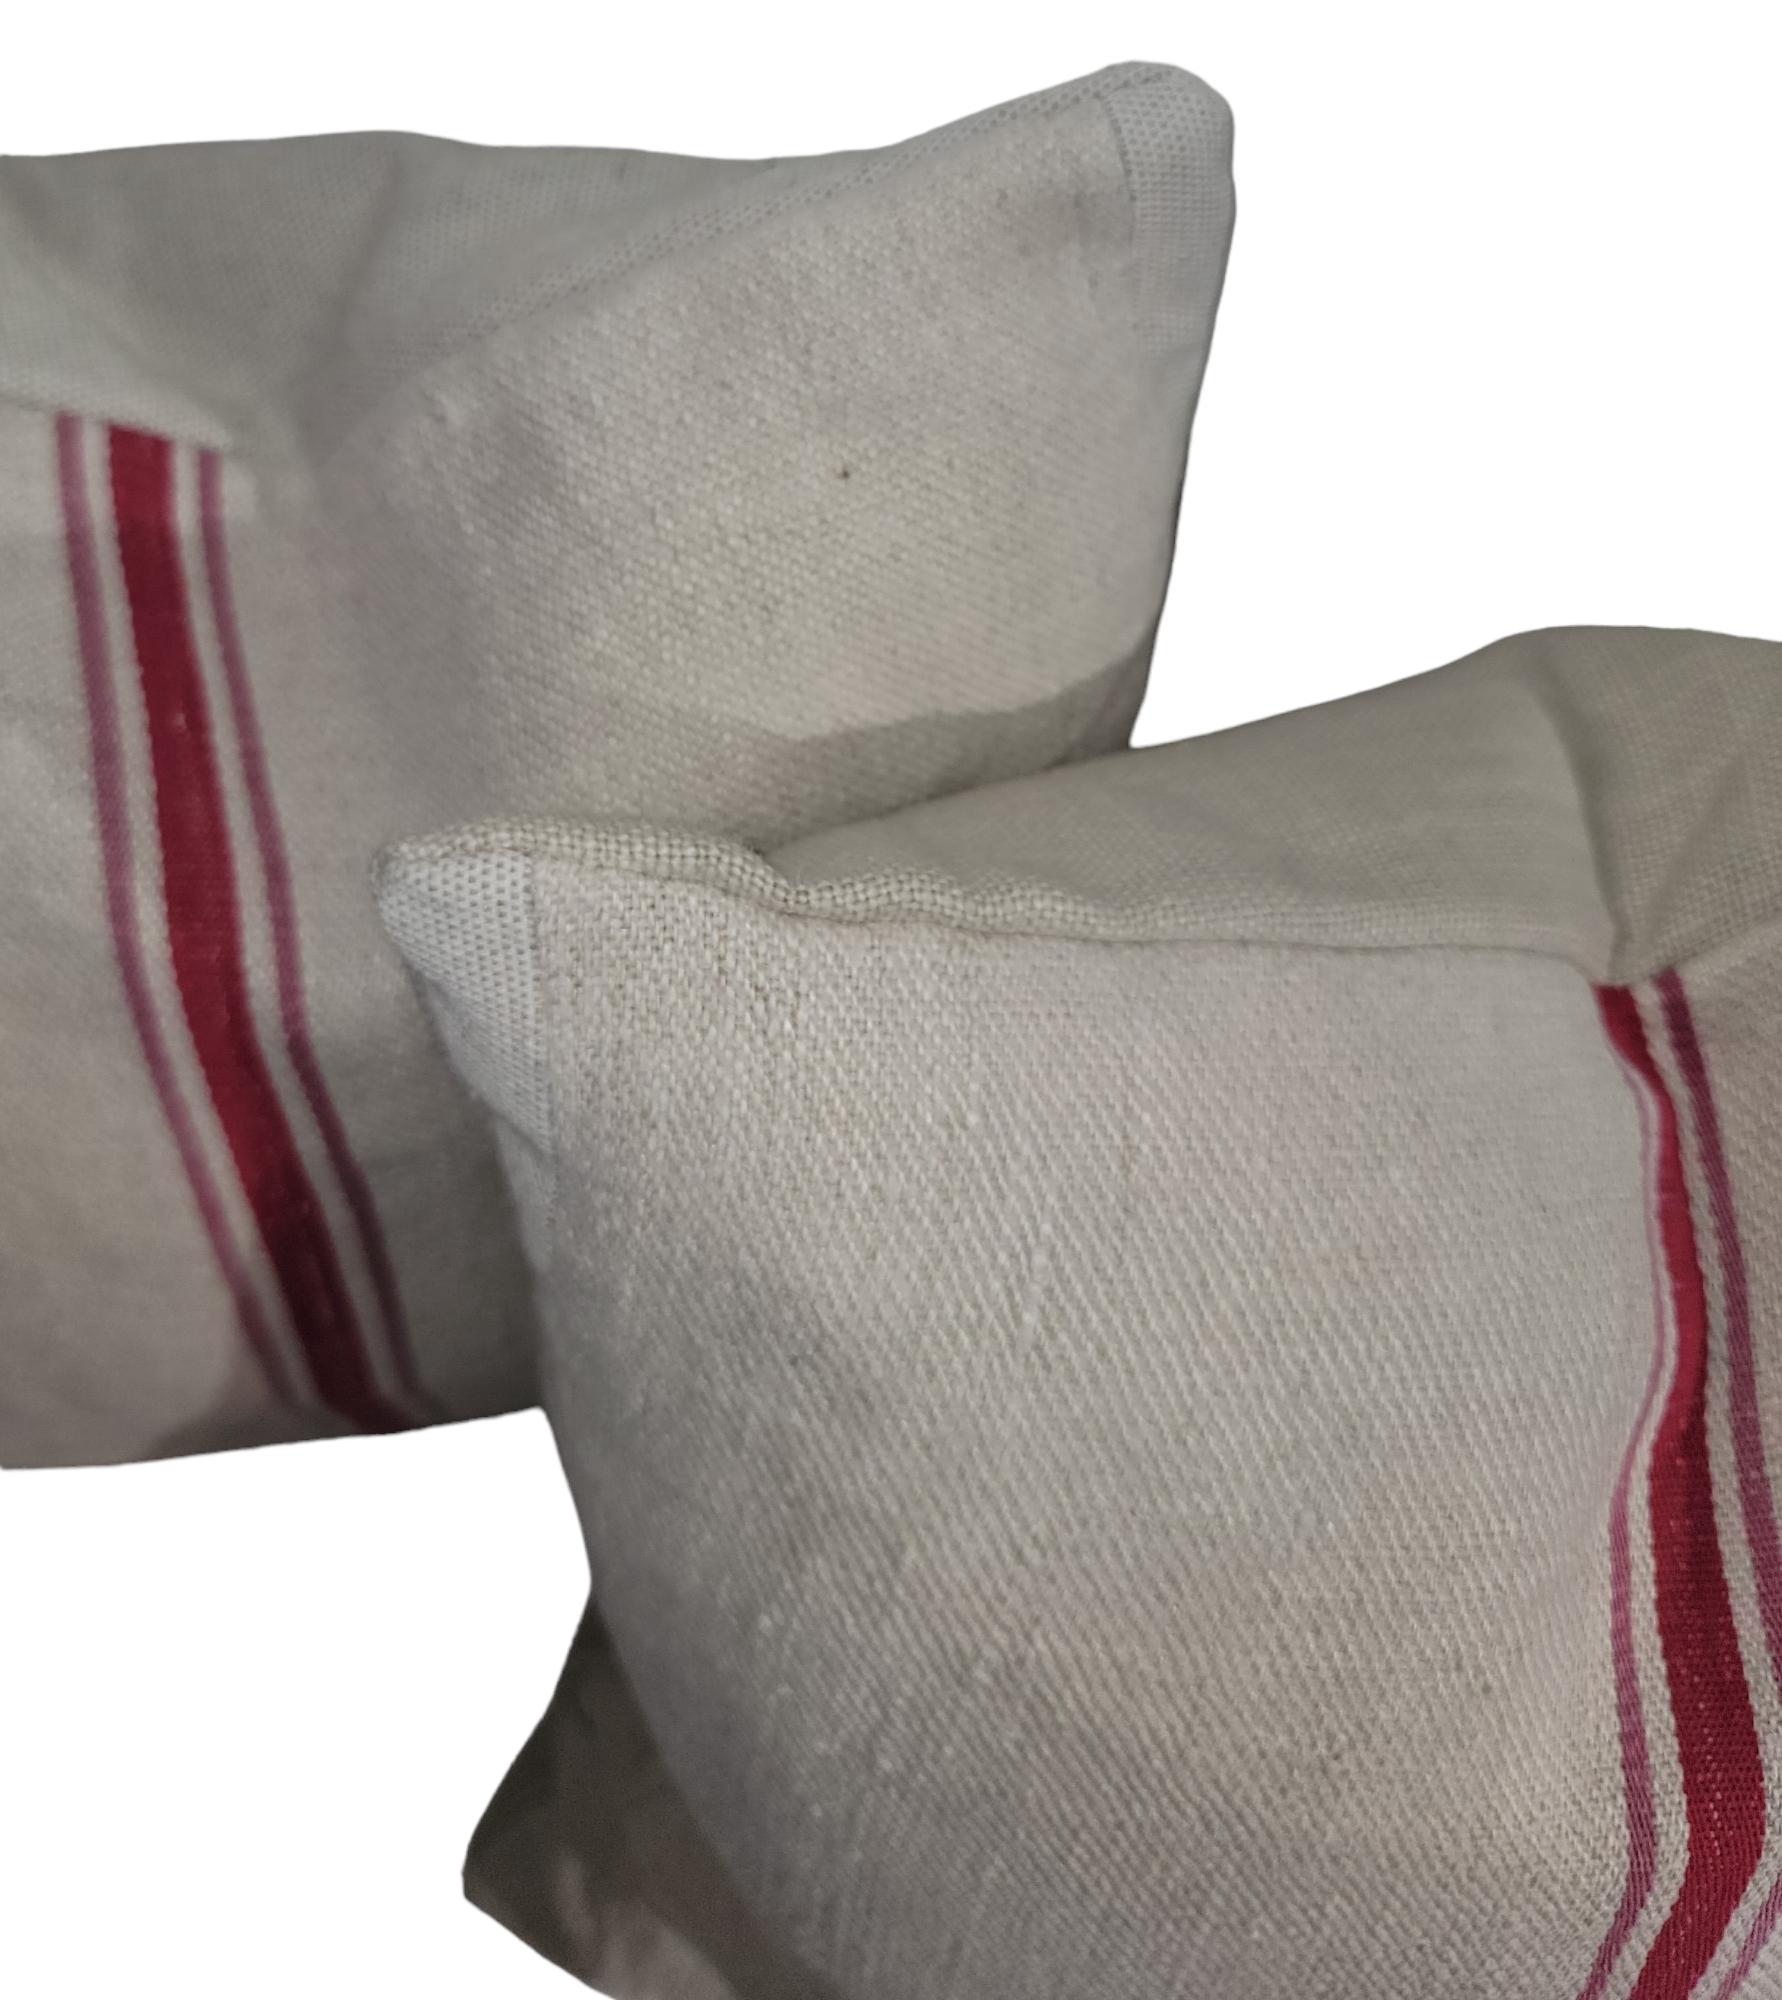 Vintage all linen pillows made from a cotton linen fabric found in a New England collection with beautiful red stripe down the middle. Neutral colors with a strong vibrant stripe. Down and feather filled insert. 